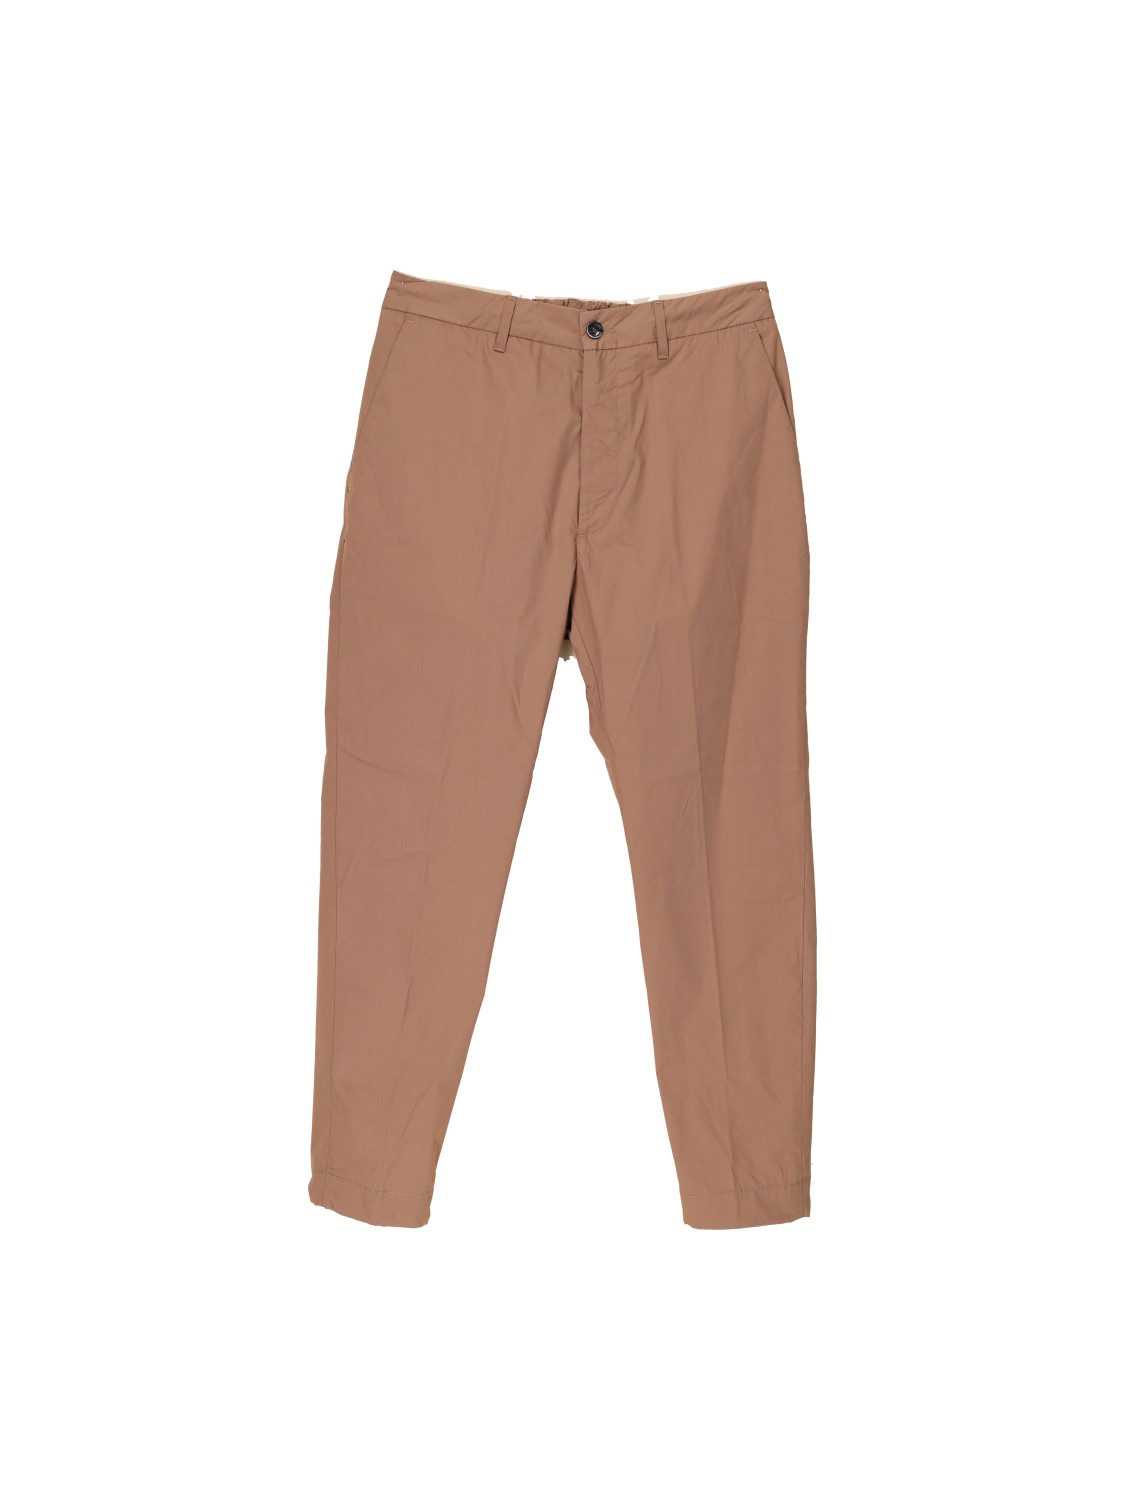 Yoga – cotton blend trousers in chino style 